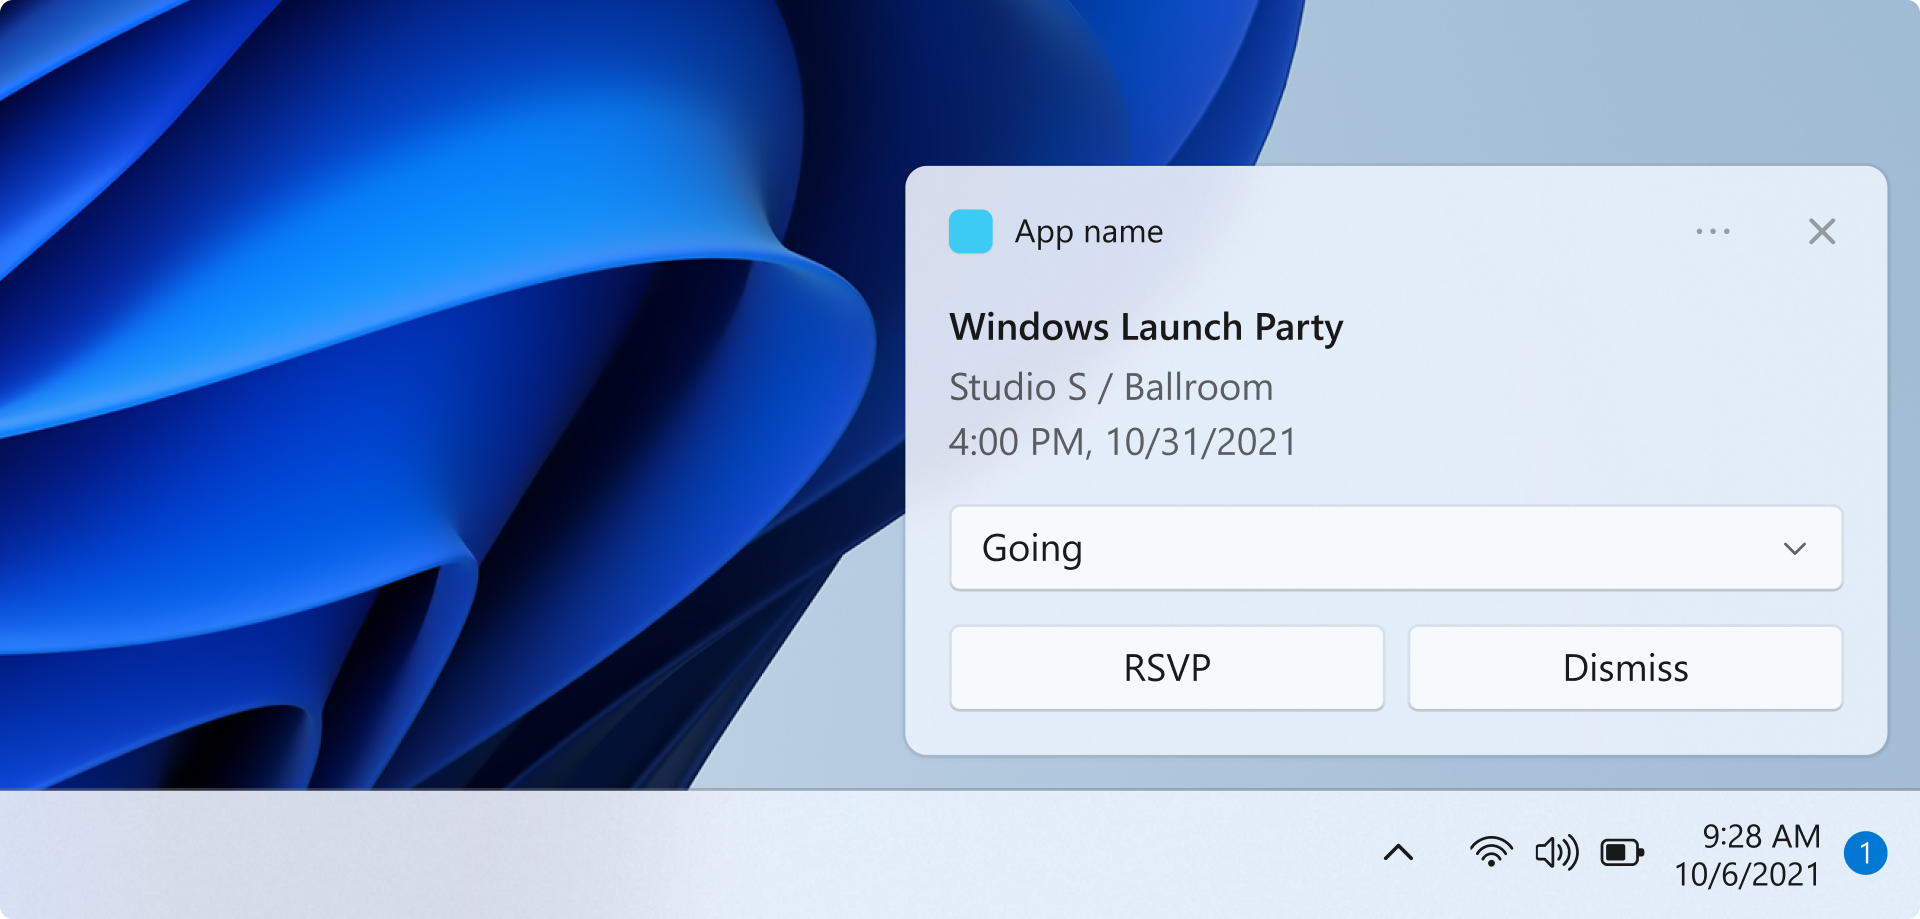 A screen capture showing a toast notification above the task bar. The notification is a reminder for an event. The app name, event name, event time, and event location are shown. A selection input displays the currently selected value, "Going". There are two buttons labeled "RSVP" and "Dismiss"